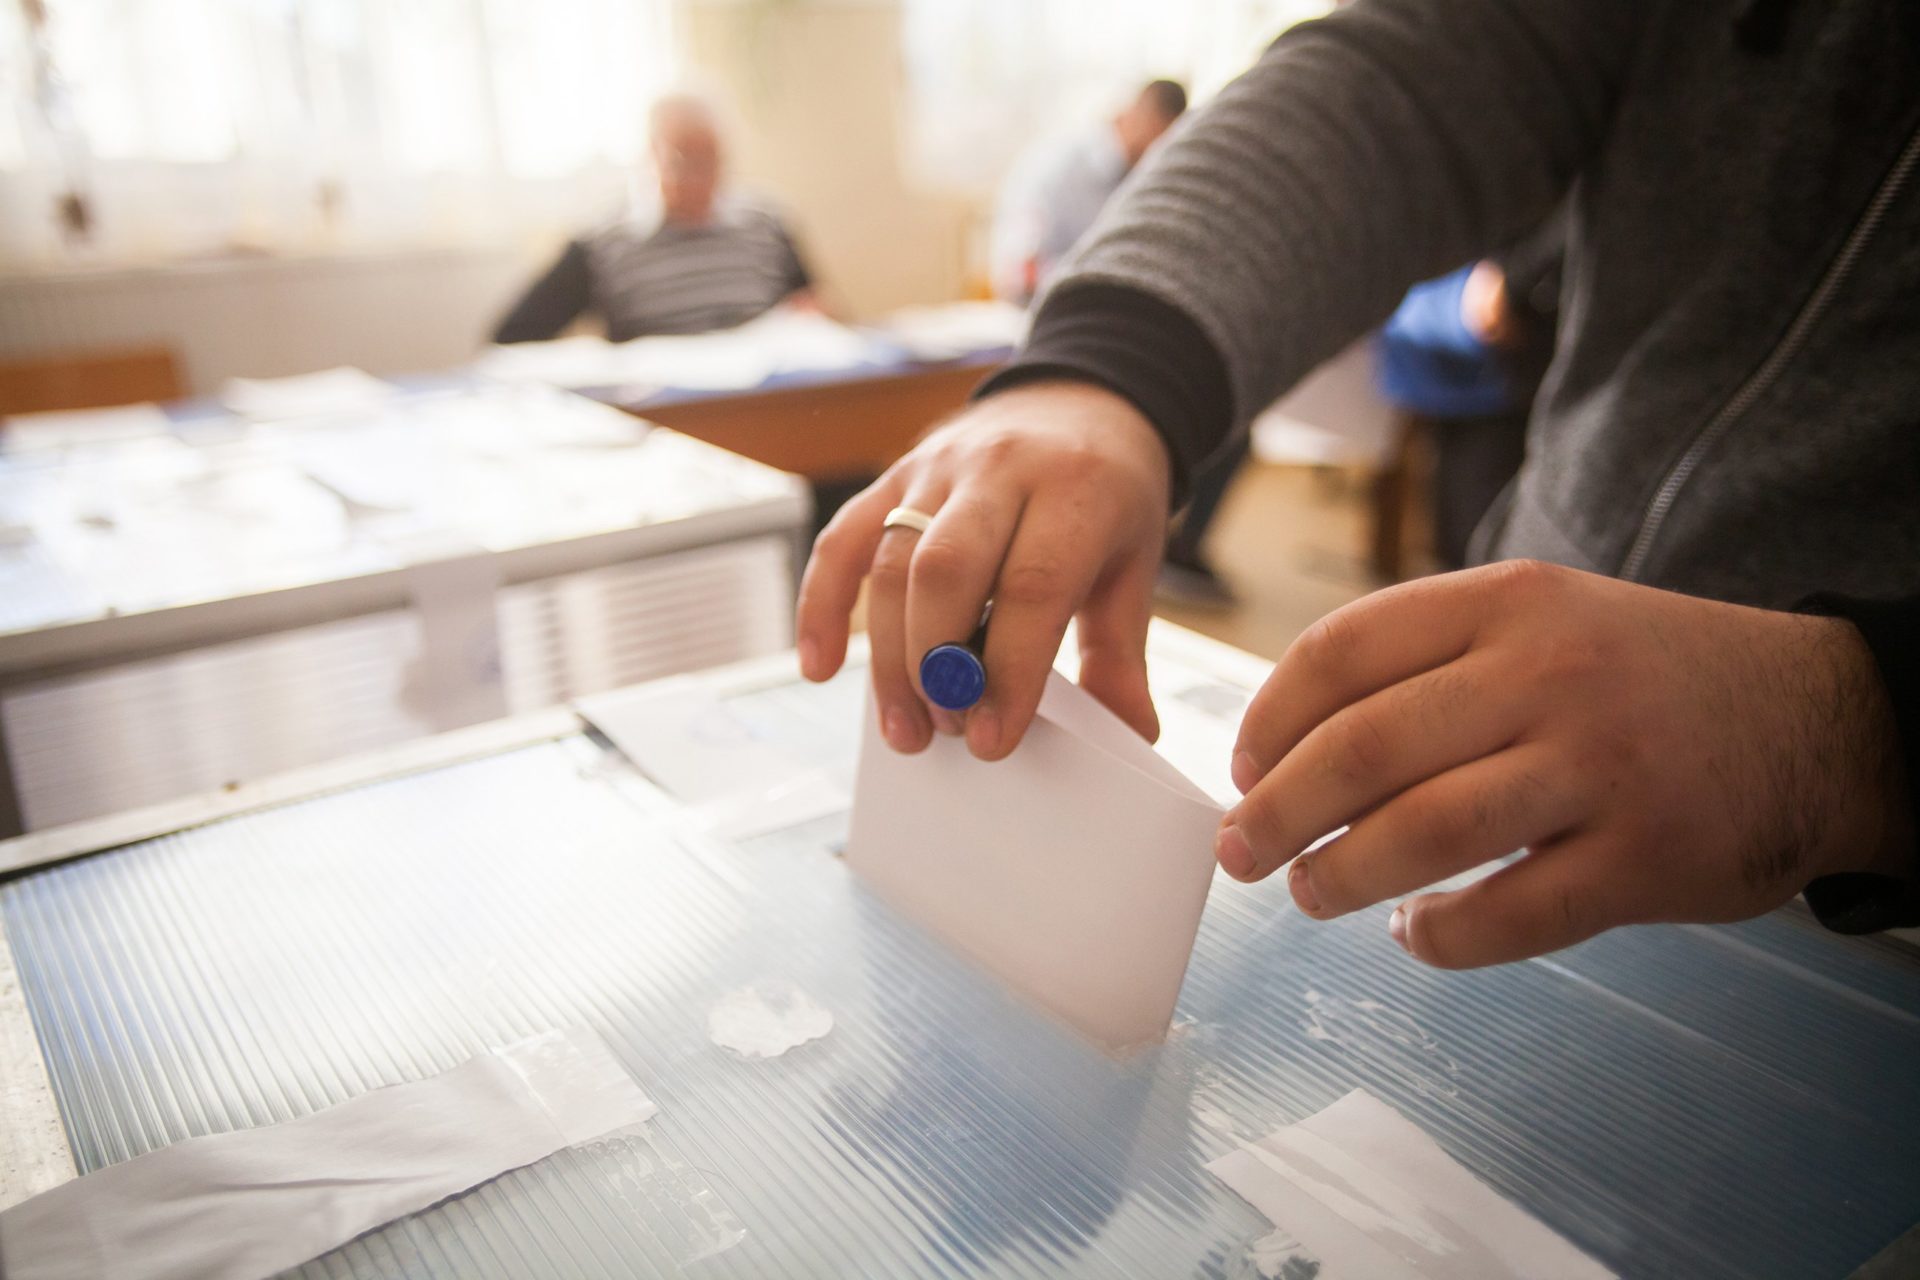 Report Recommends That Blockchain Should Not Be Used for Voting